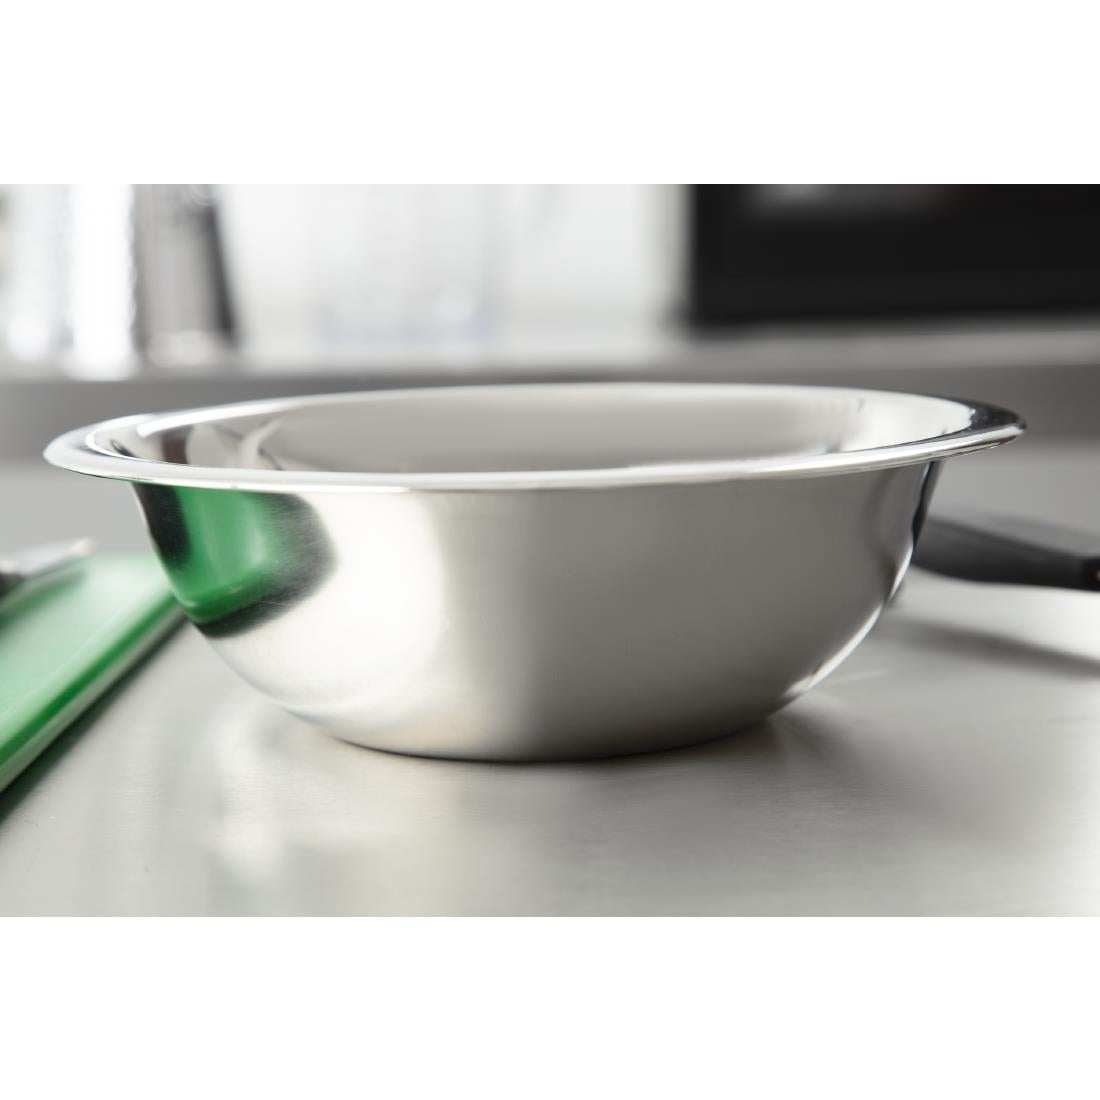 DL937 Vogue Stainless Steel Mixing Bowl 1Ltr JD Catering Equipment Solutions Ltd